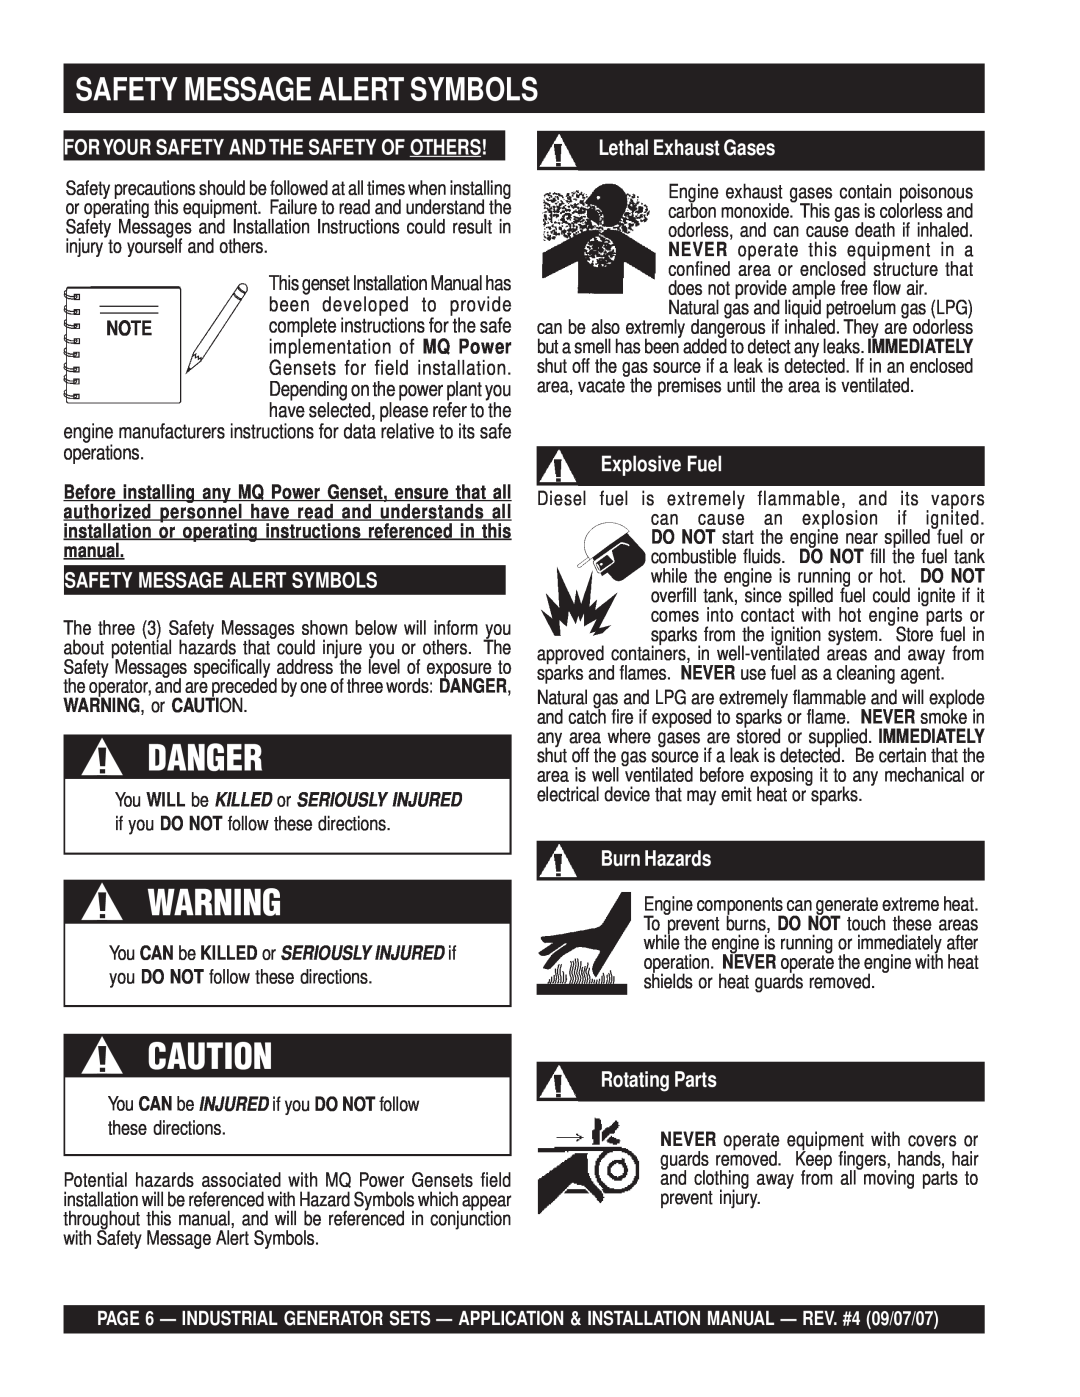 Multiquip MQP30DZ, MQP20IZ Safety Message Alert Symbols, Foryour Safety And The Safety Of Others, Lethal Exhaust Gases 